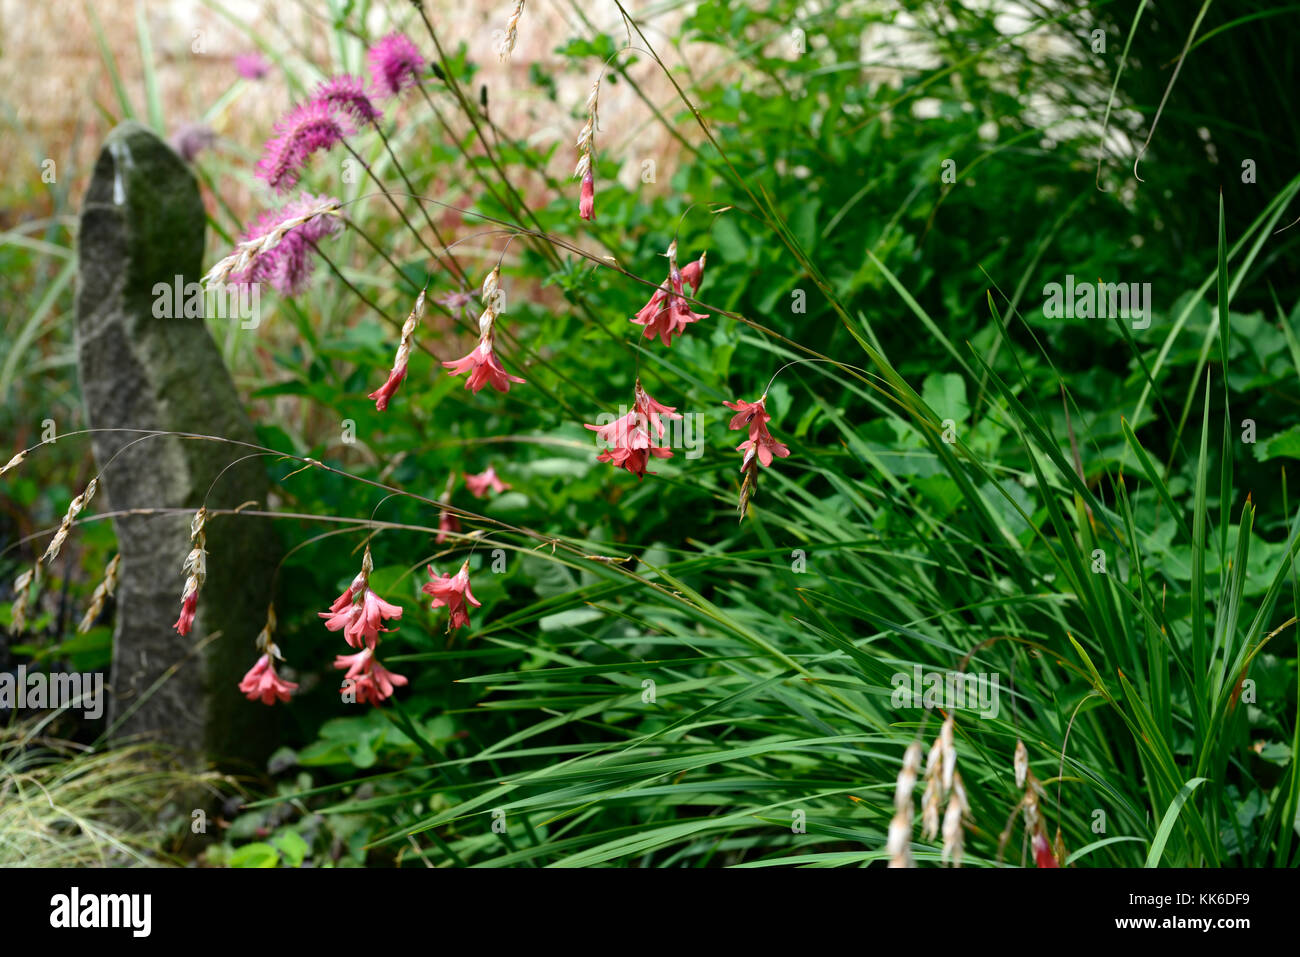 dierama igneum, pink, coral, flowers, perennials, arching,arch, arched,plant, plants, dangling, hanging, bell ,shaped, angels fishing rods,RM Floral Stock Photo